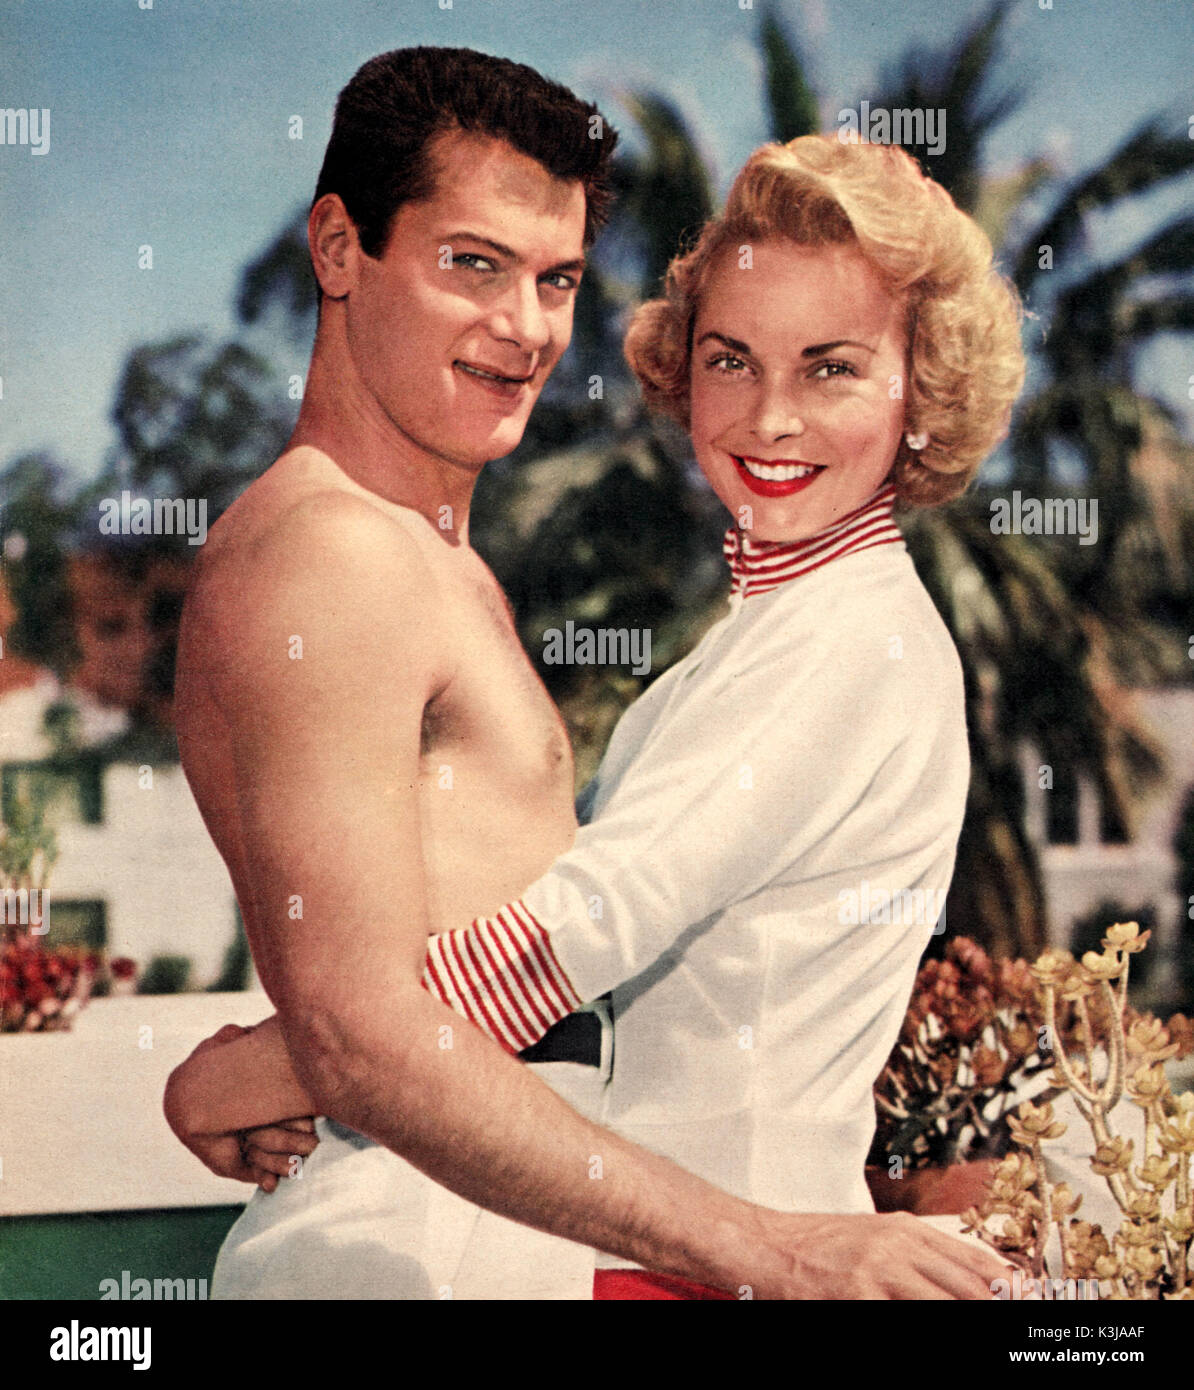 TONY CURTIS & JANET LEIGH Married 1951 - 1962 TONY CURTIS & JANET LEIGH Married 1951 - 1962 Stock Photo